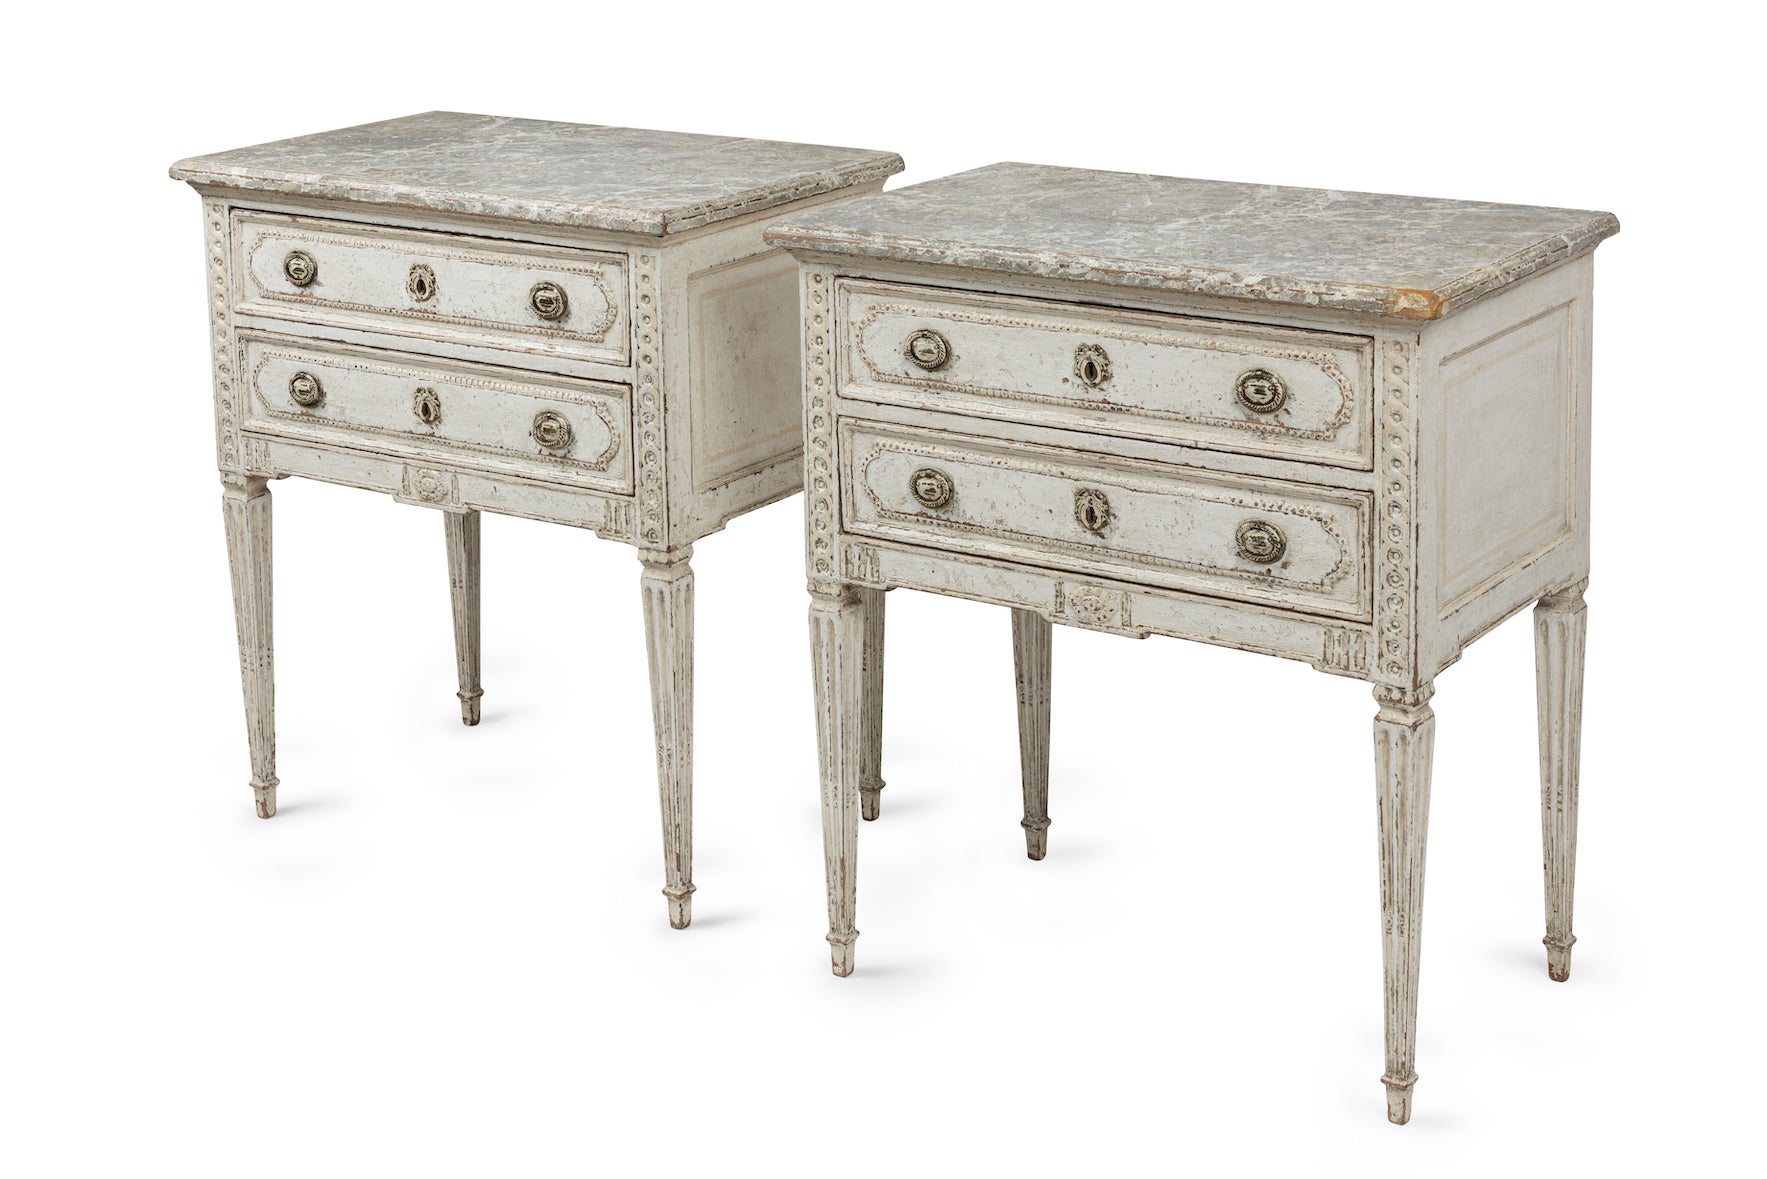 SOLD A fabulous pair of Louis XVI style commodes, French 19th Century